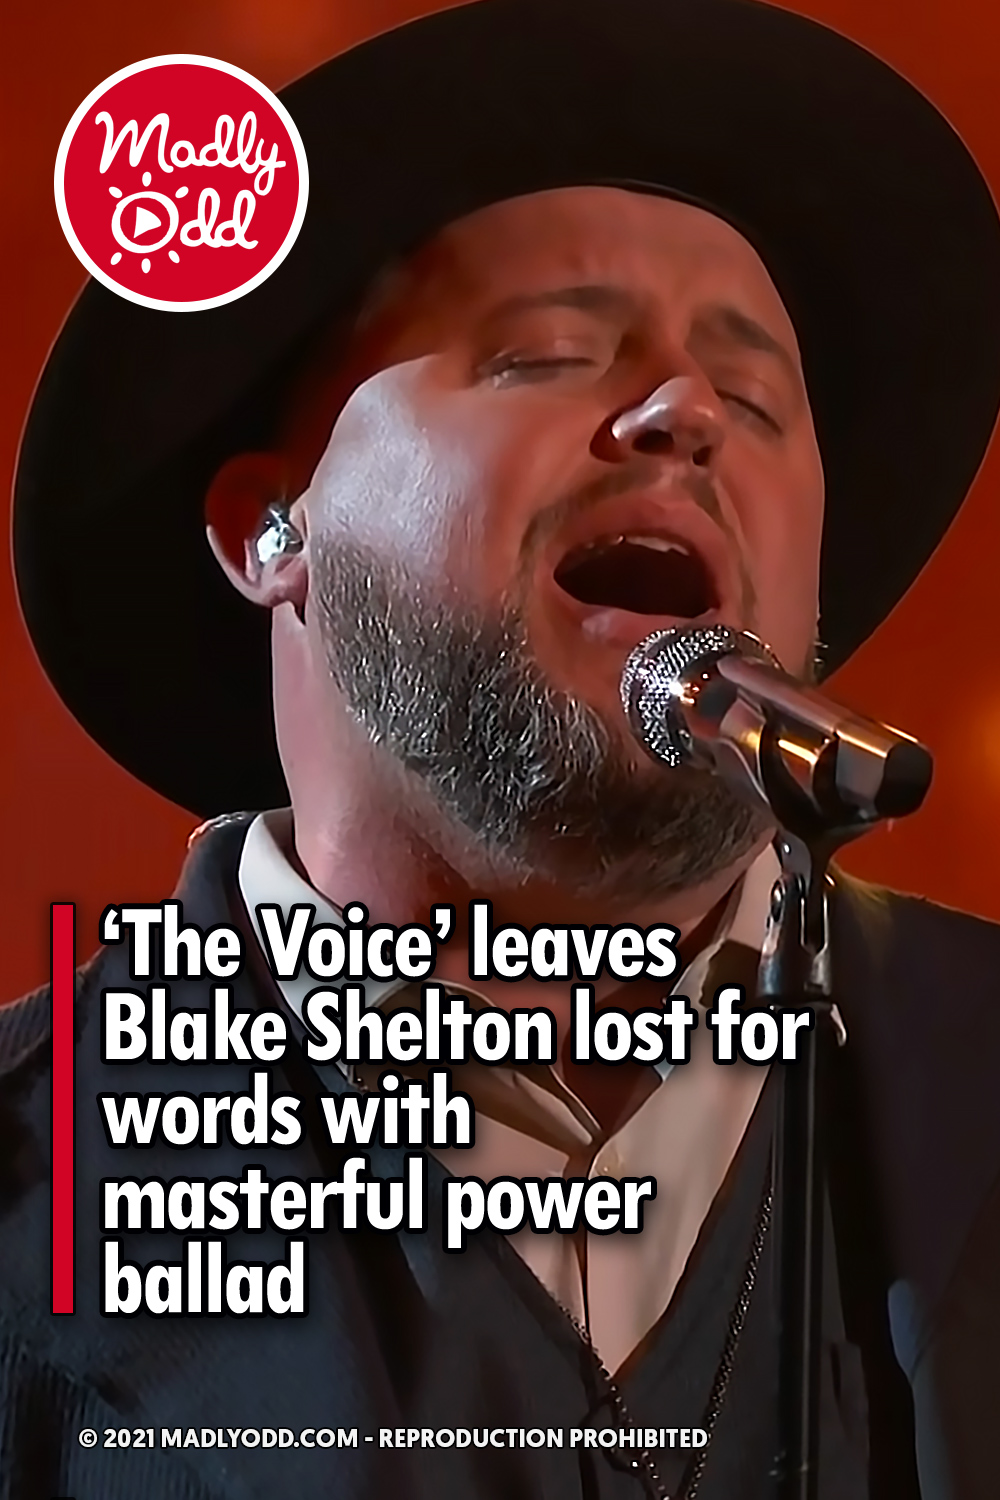 ‘The Voice’ leaves Blake Shelton lost for words with masterful power ballad